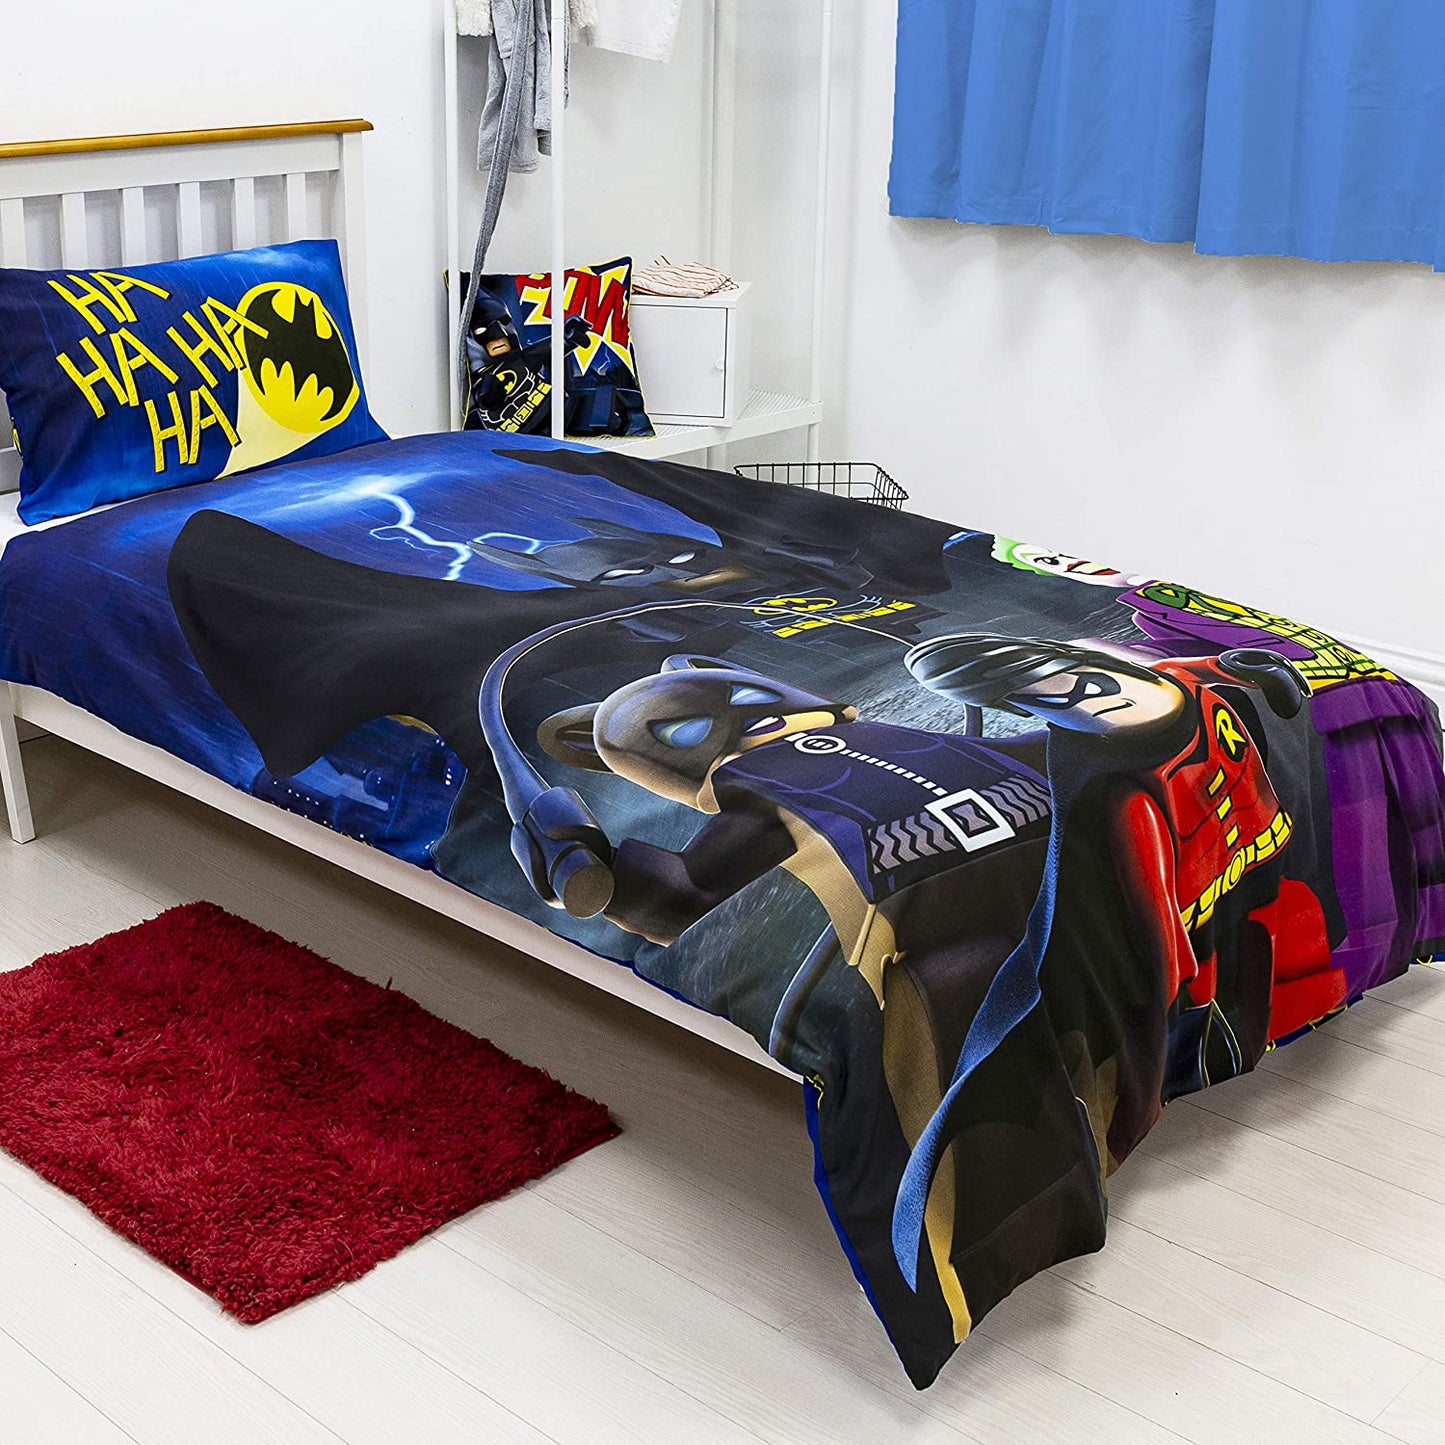 Single Bed Lego Heroes Challenge Reversible Duvet Cover Set Character Bedding Official